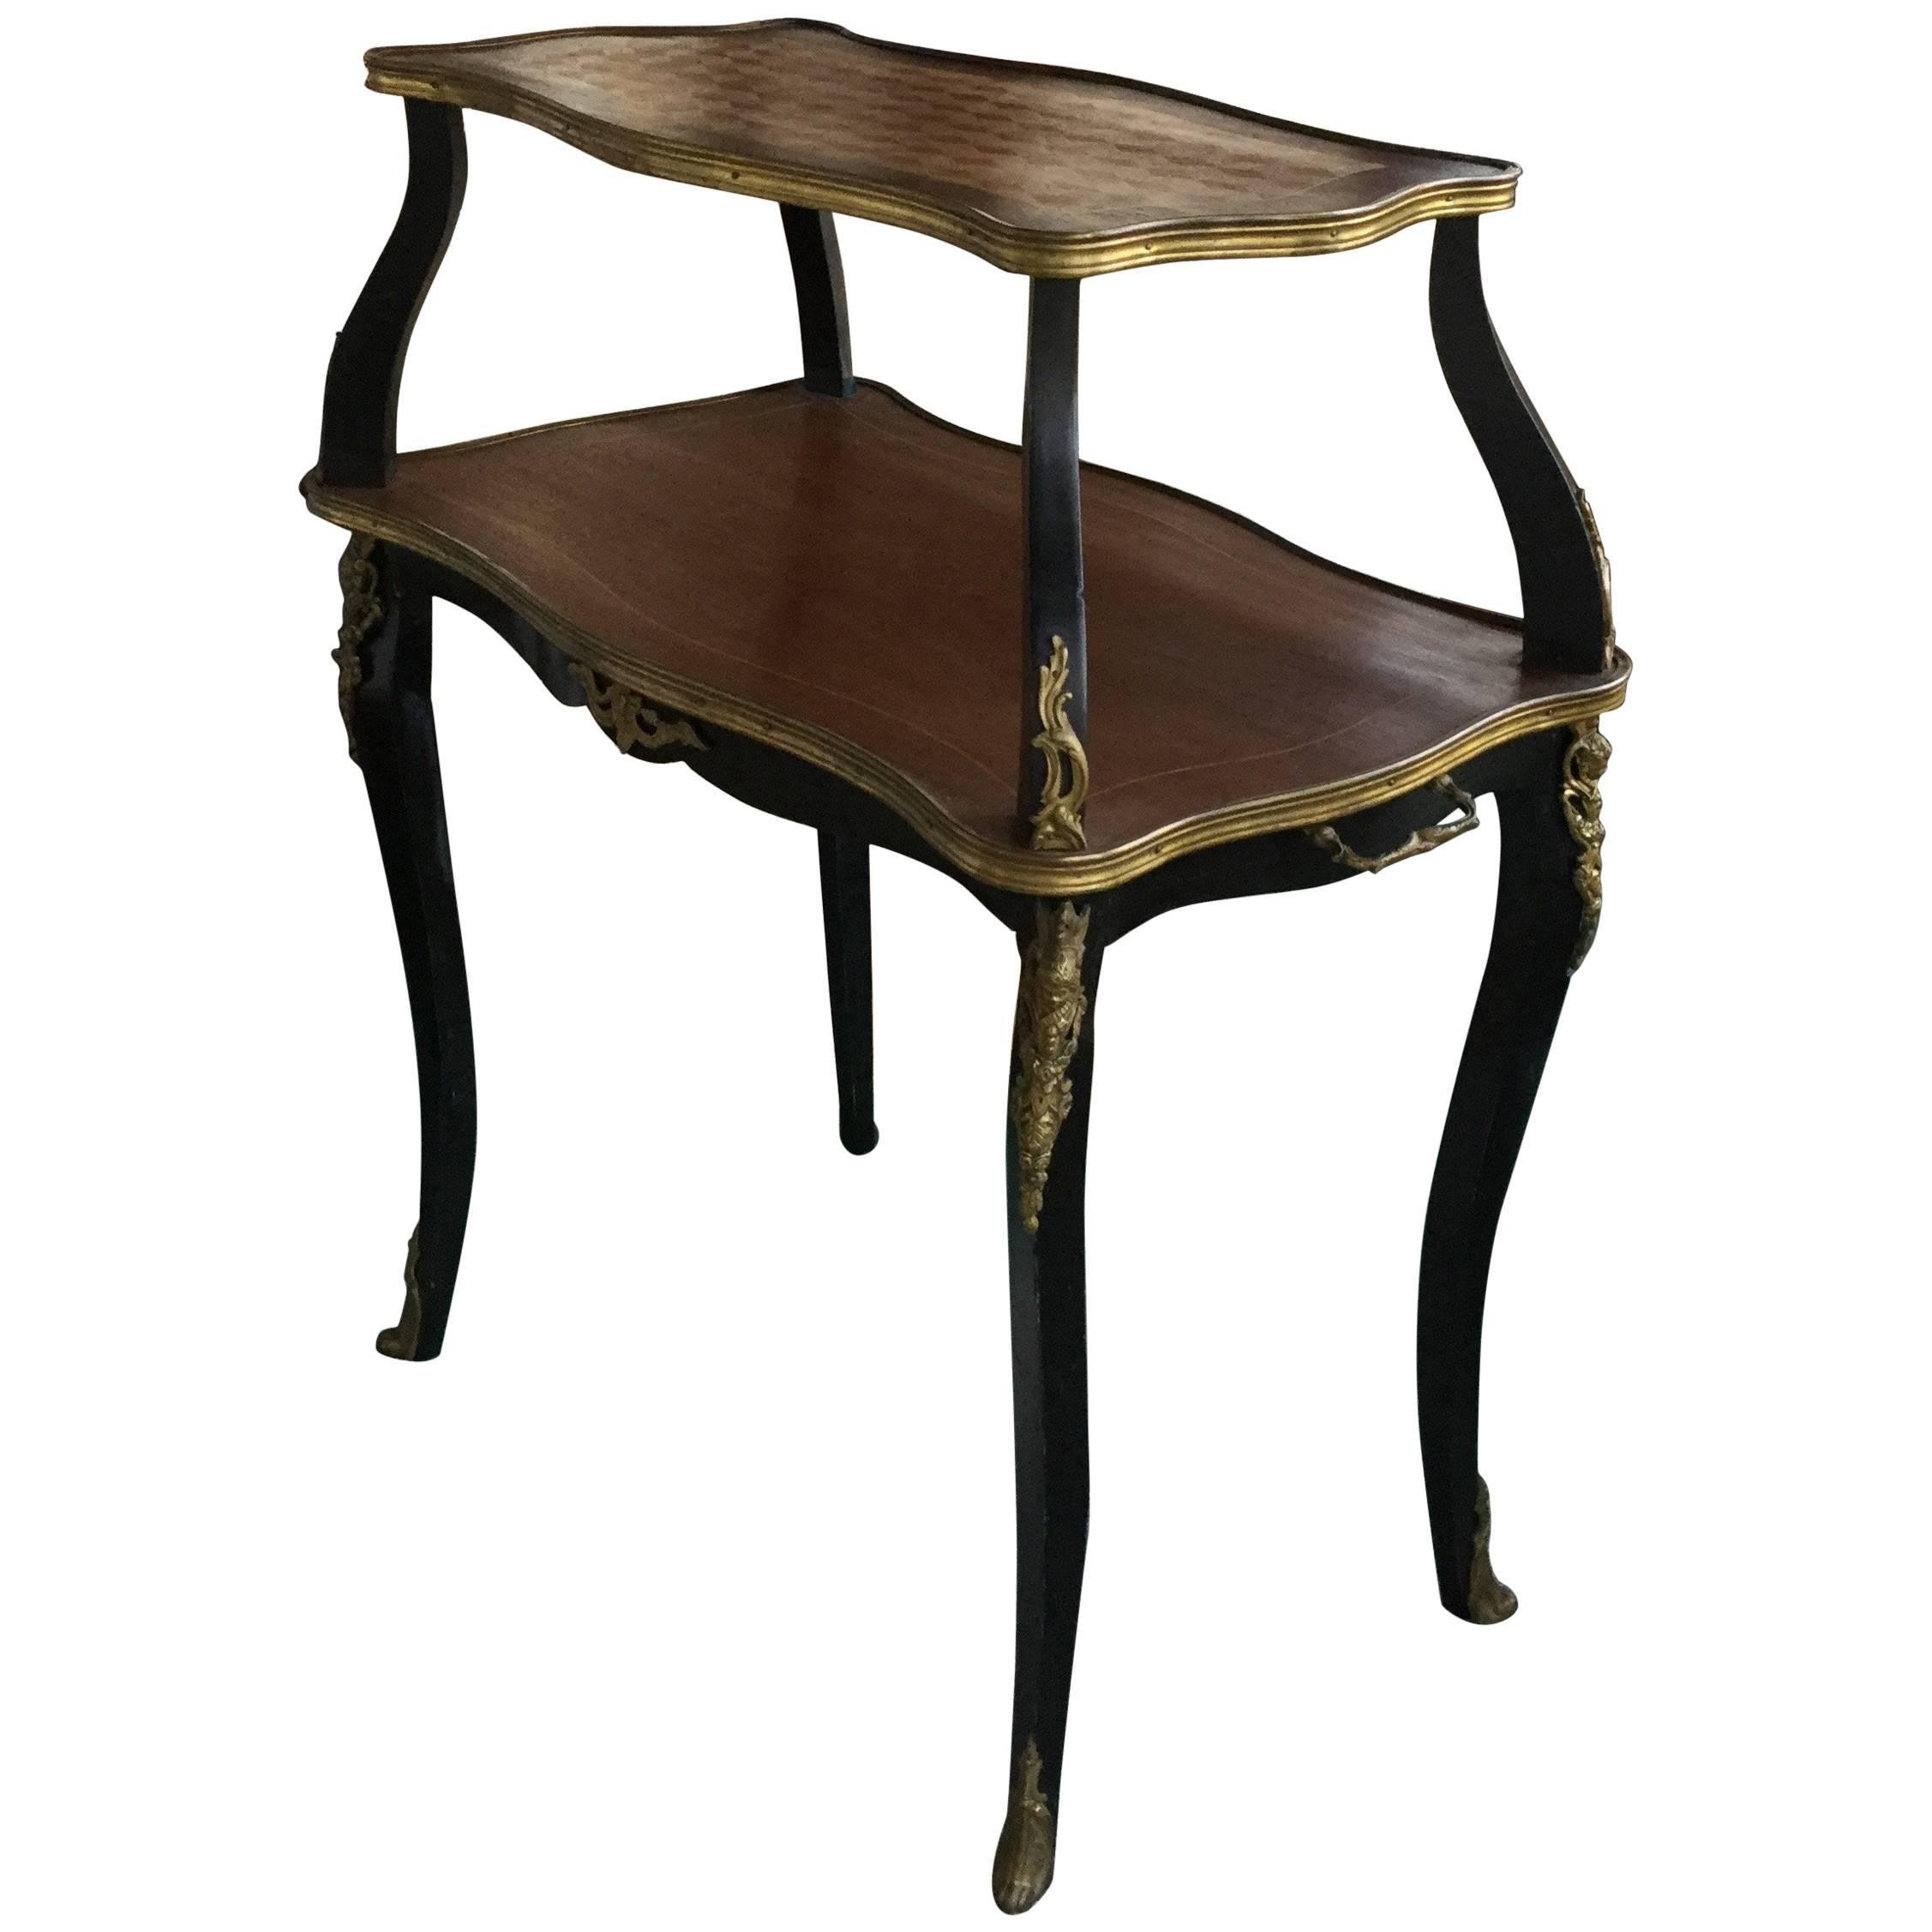 Elegant Louis XV Style Two-Tier Walnut Parquet Top Side Table For Sale